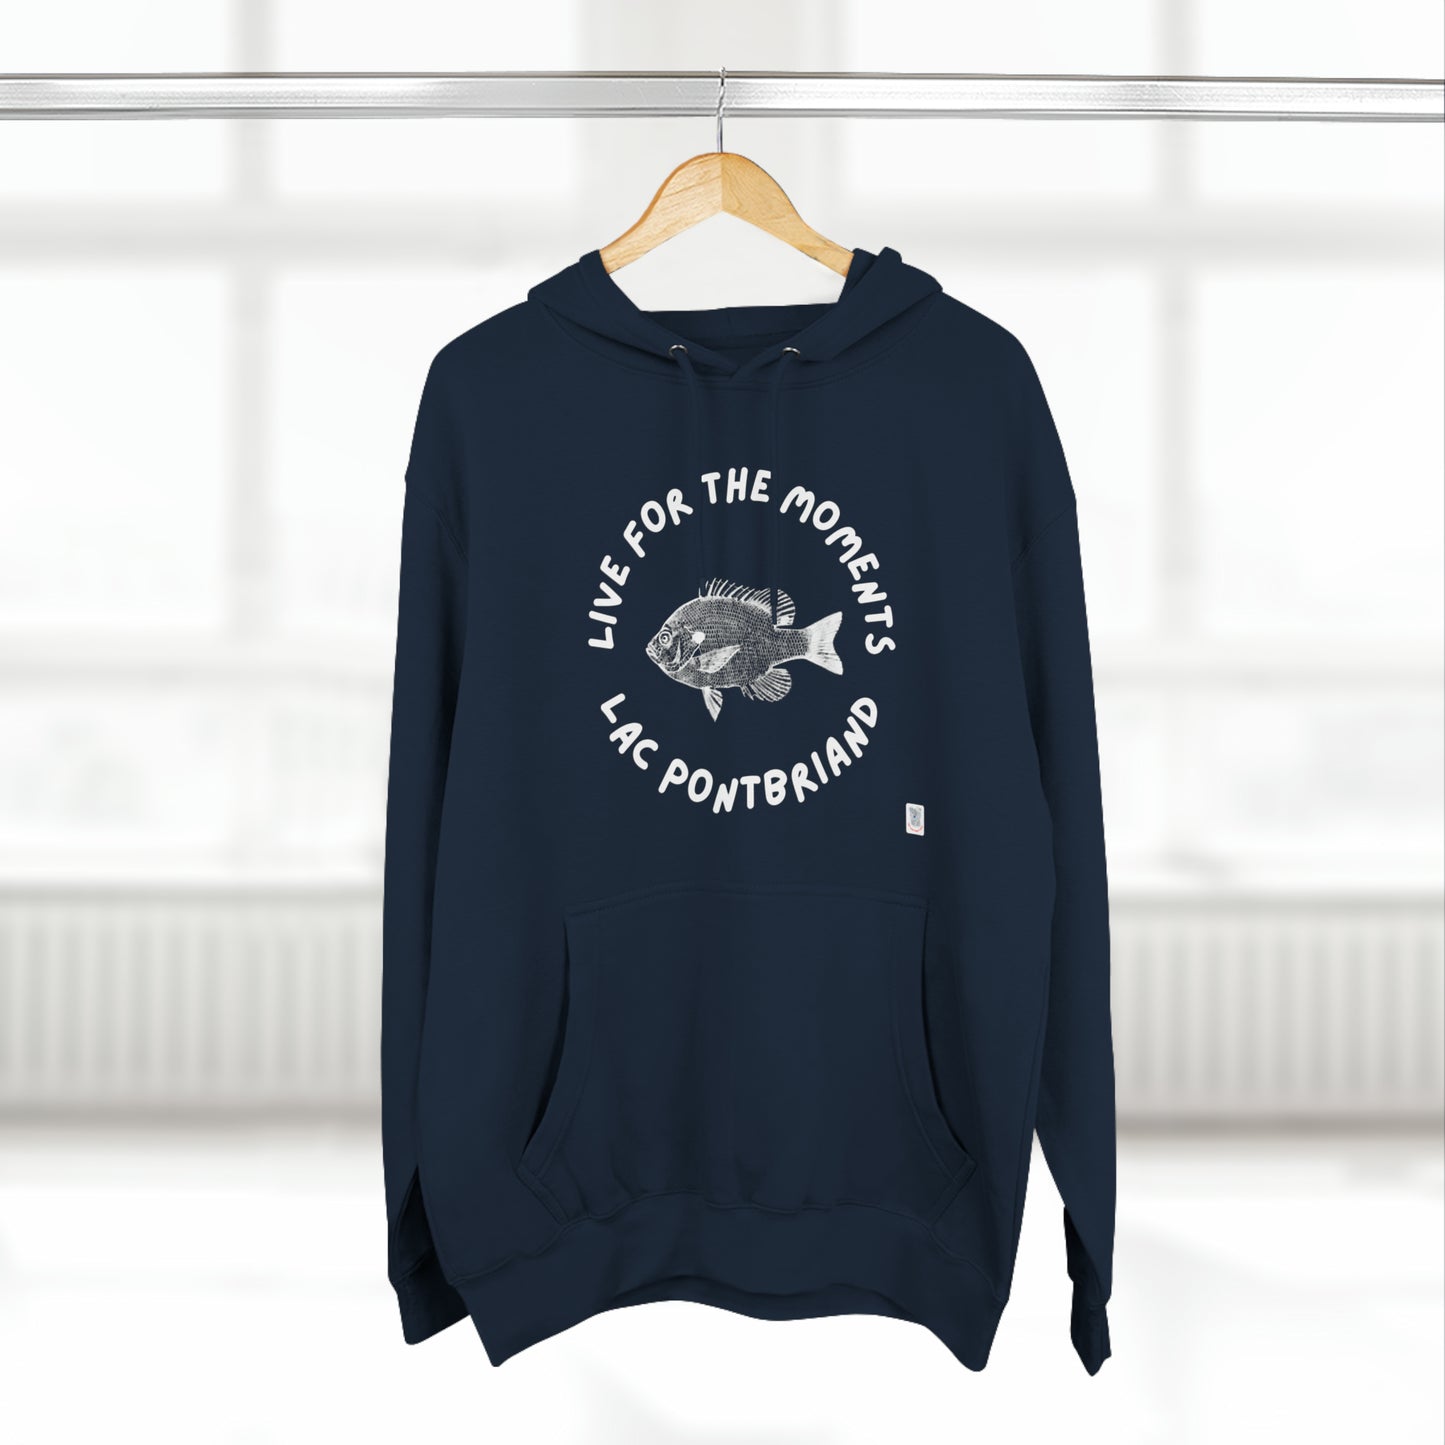 Lac Pontbriand, Quebec Pullover Hoodie